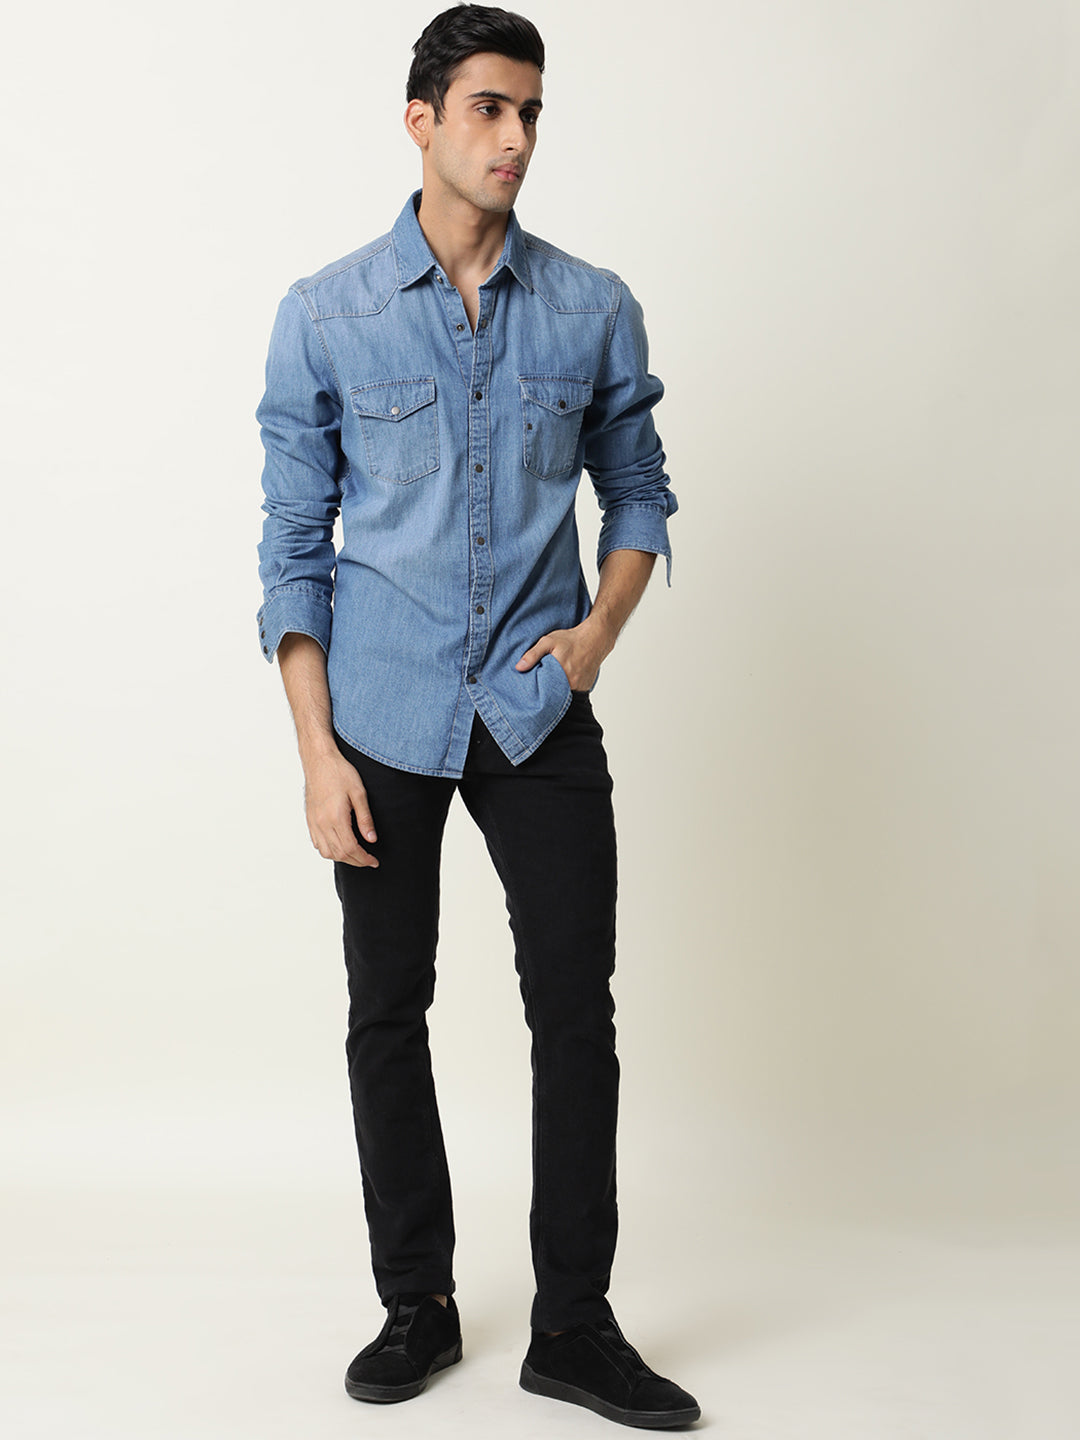 How To Wear A Denim Shirt For Every Season |30+ Looks | Ways Of Style